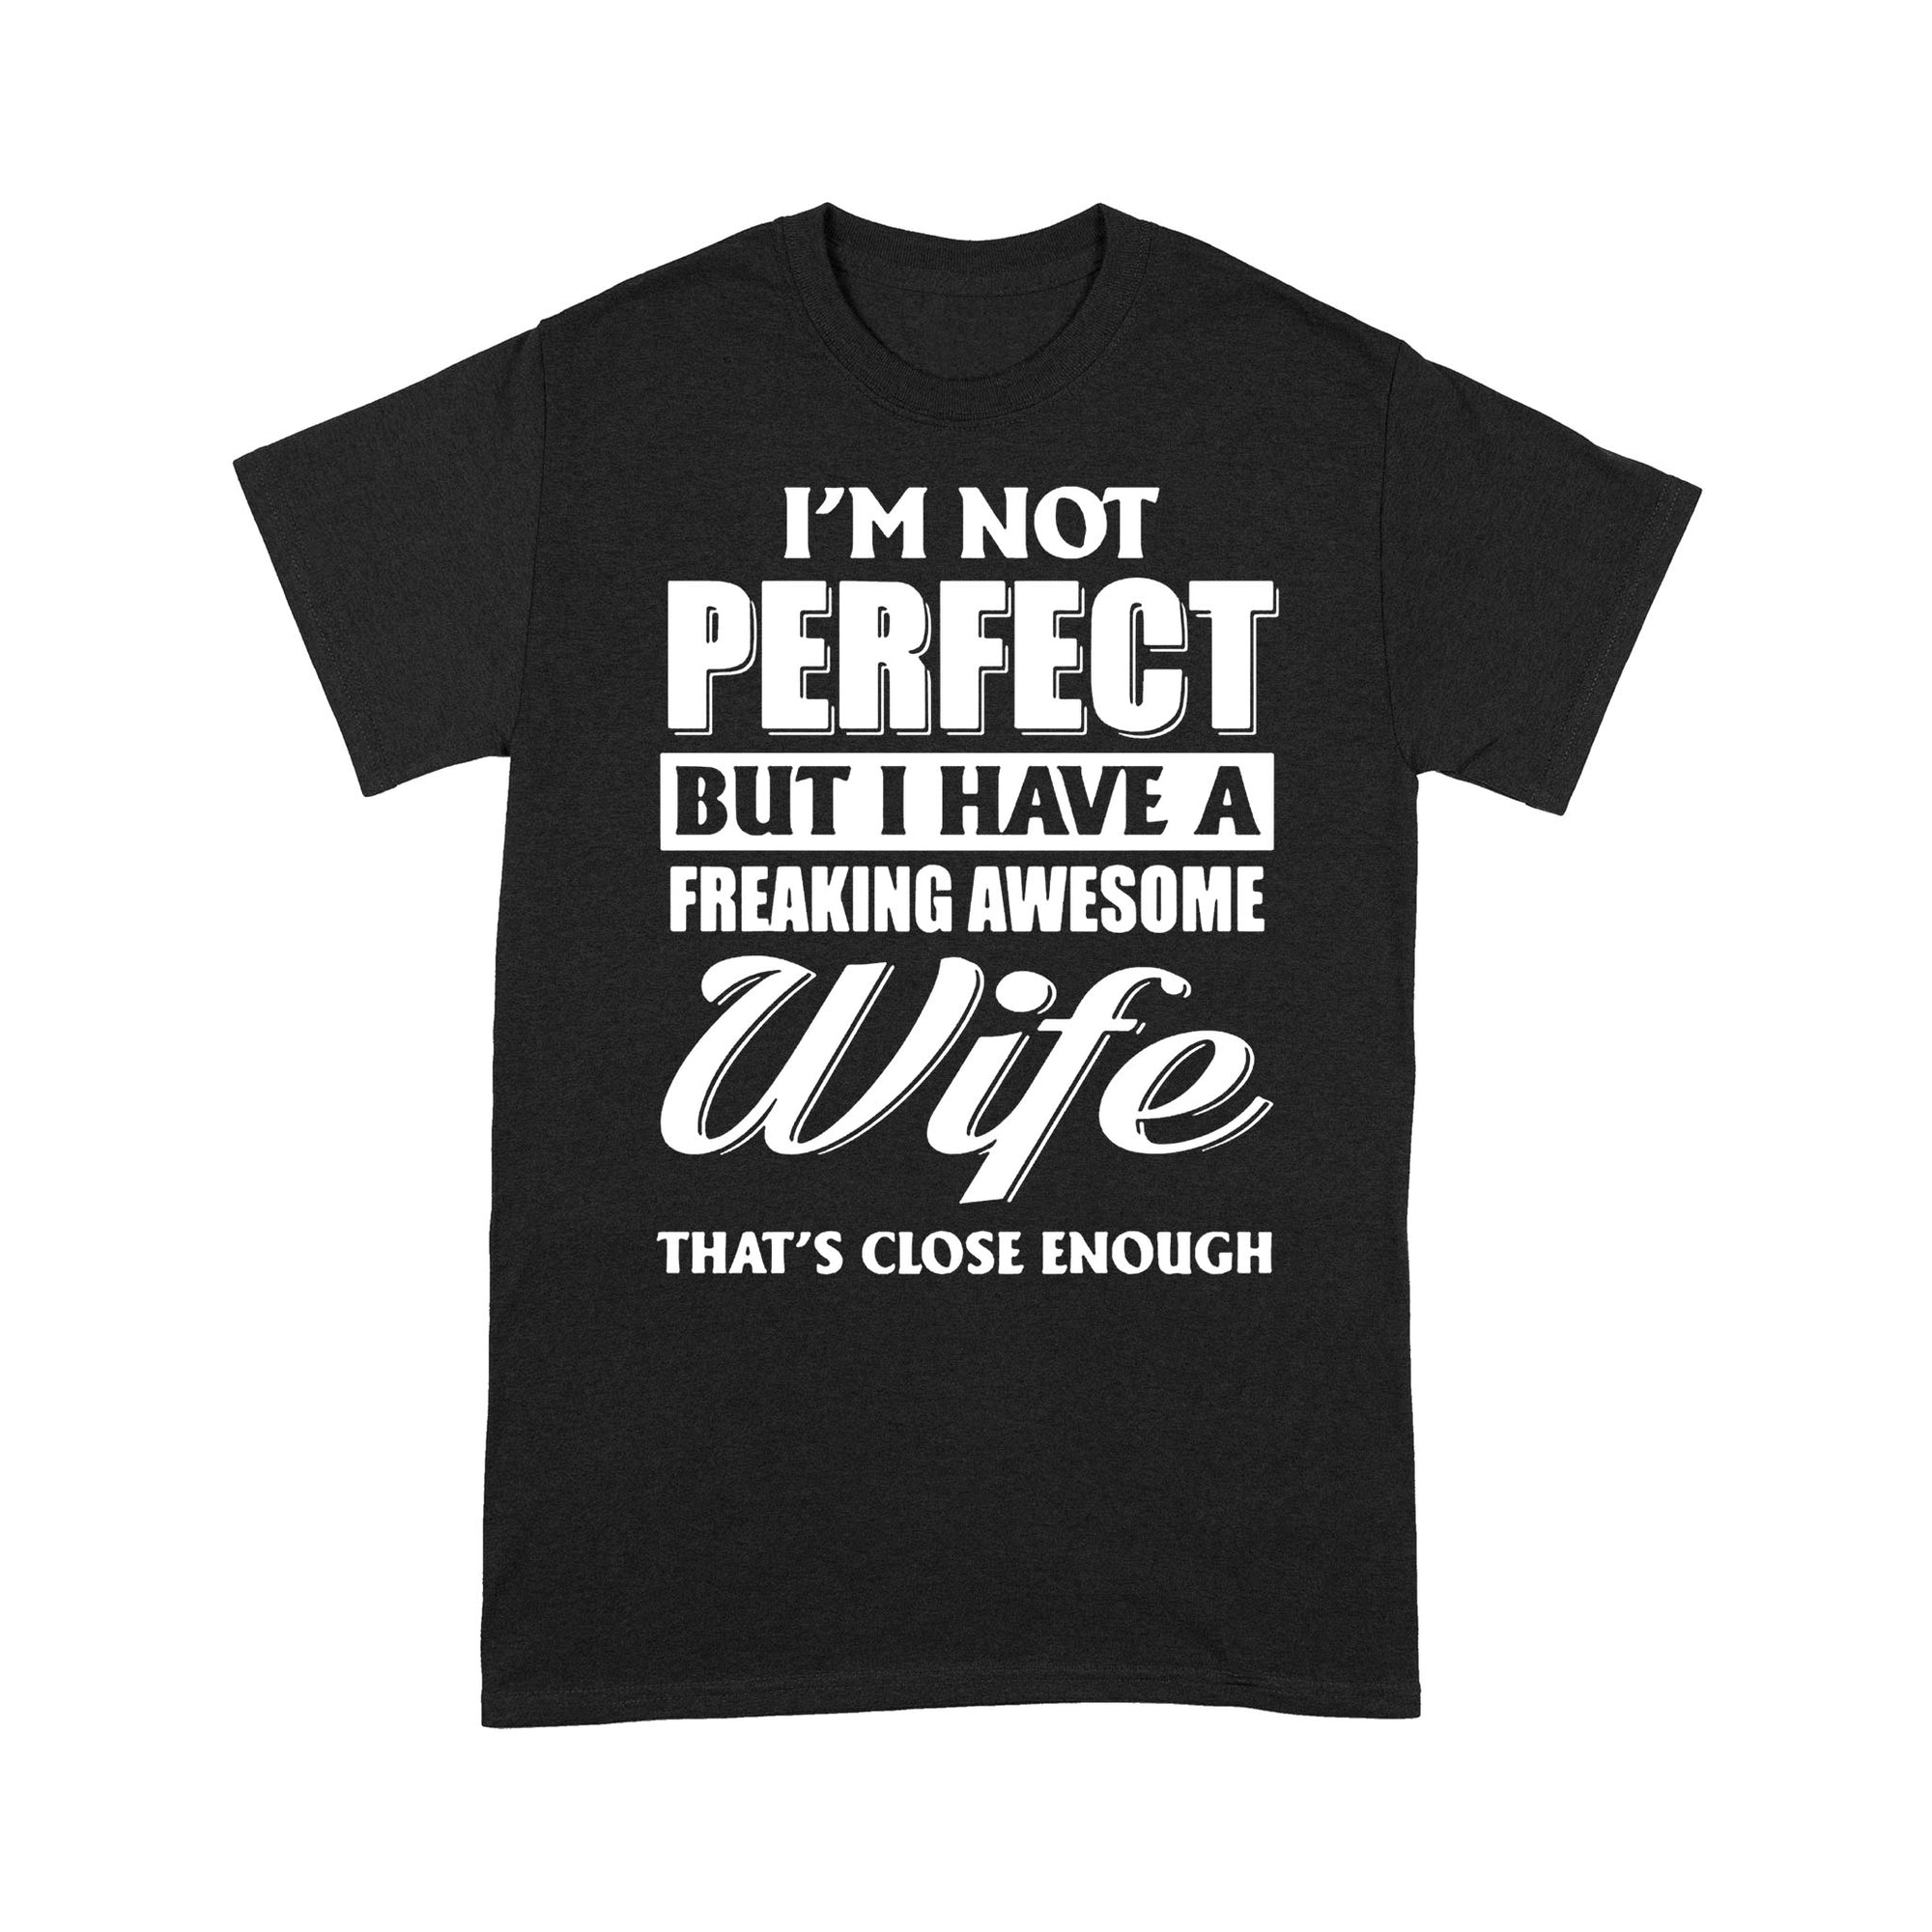 I'm Not Perfect But I Have A Freaking Awesome Wife, That's Close Enough - Standard T-shirt